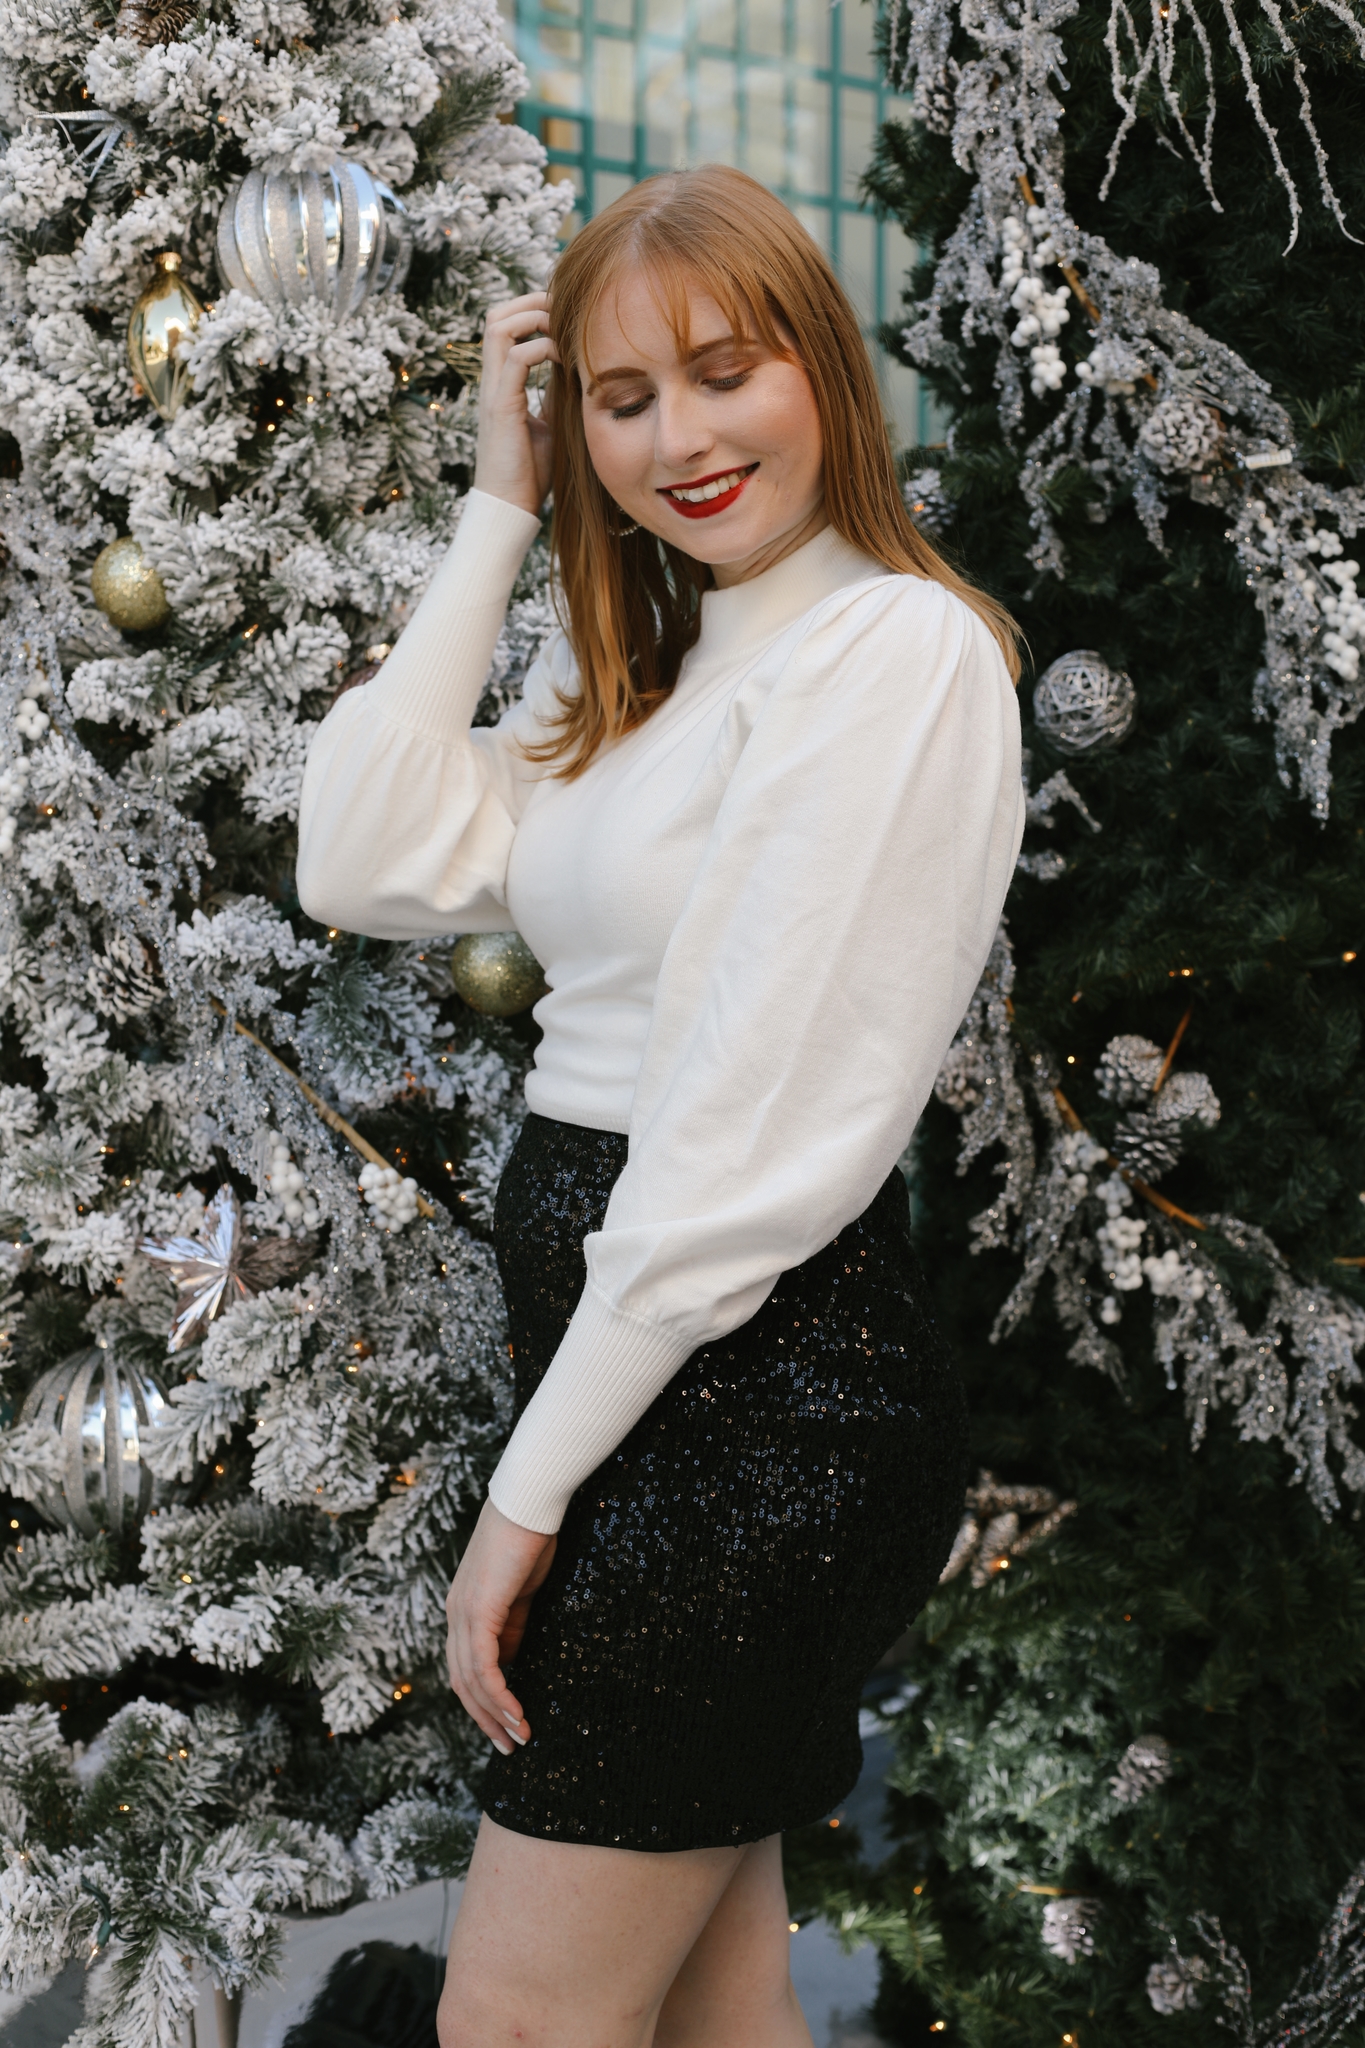 New Years Eve Outfit Ideas 2020 | Affordable by Amanda